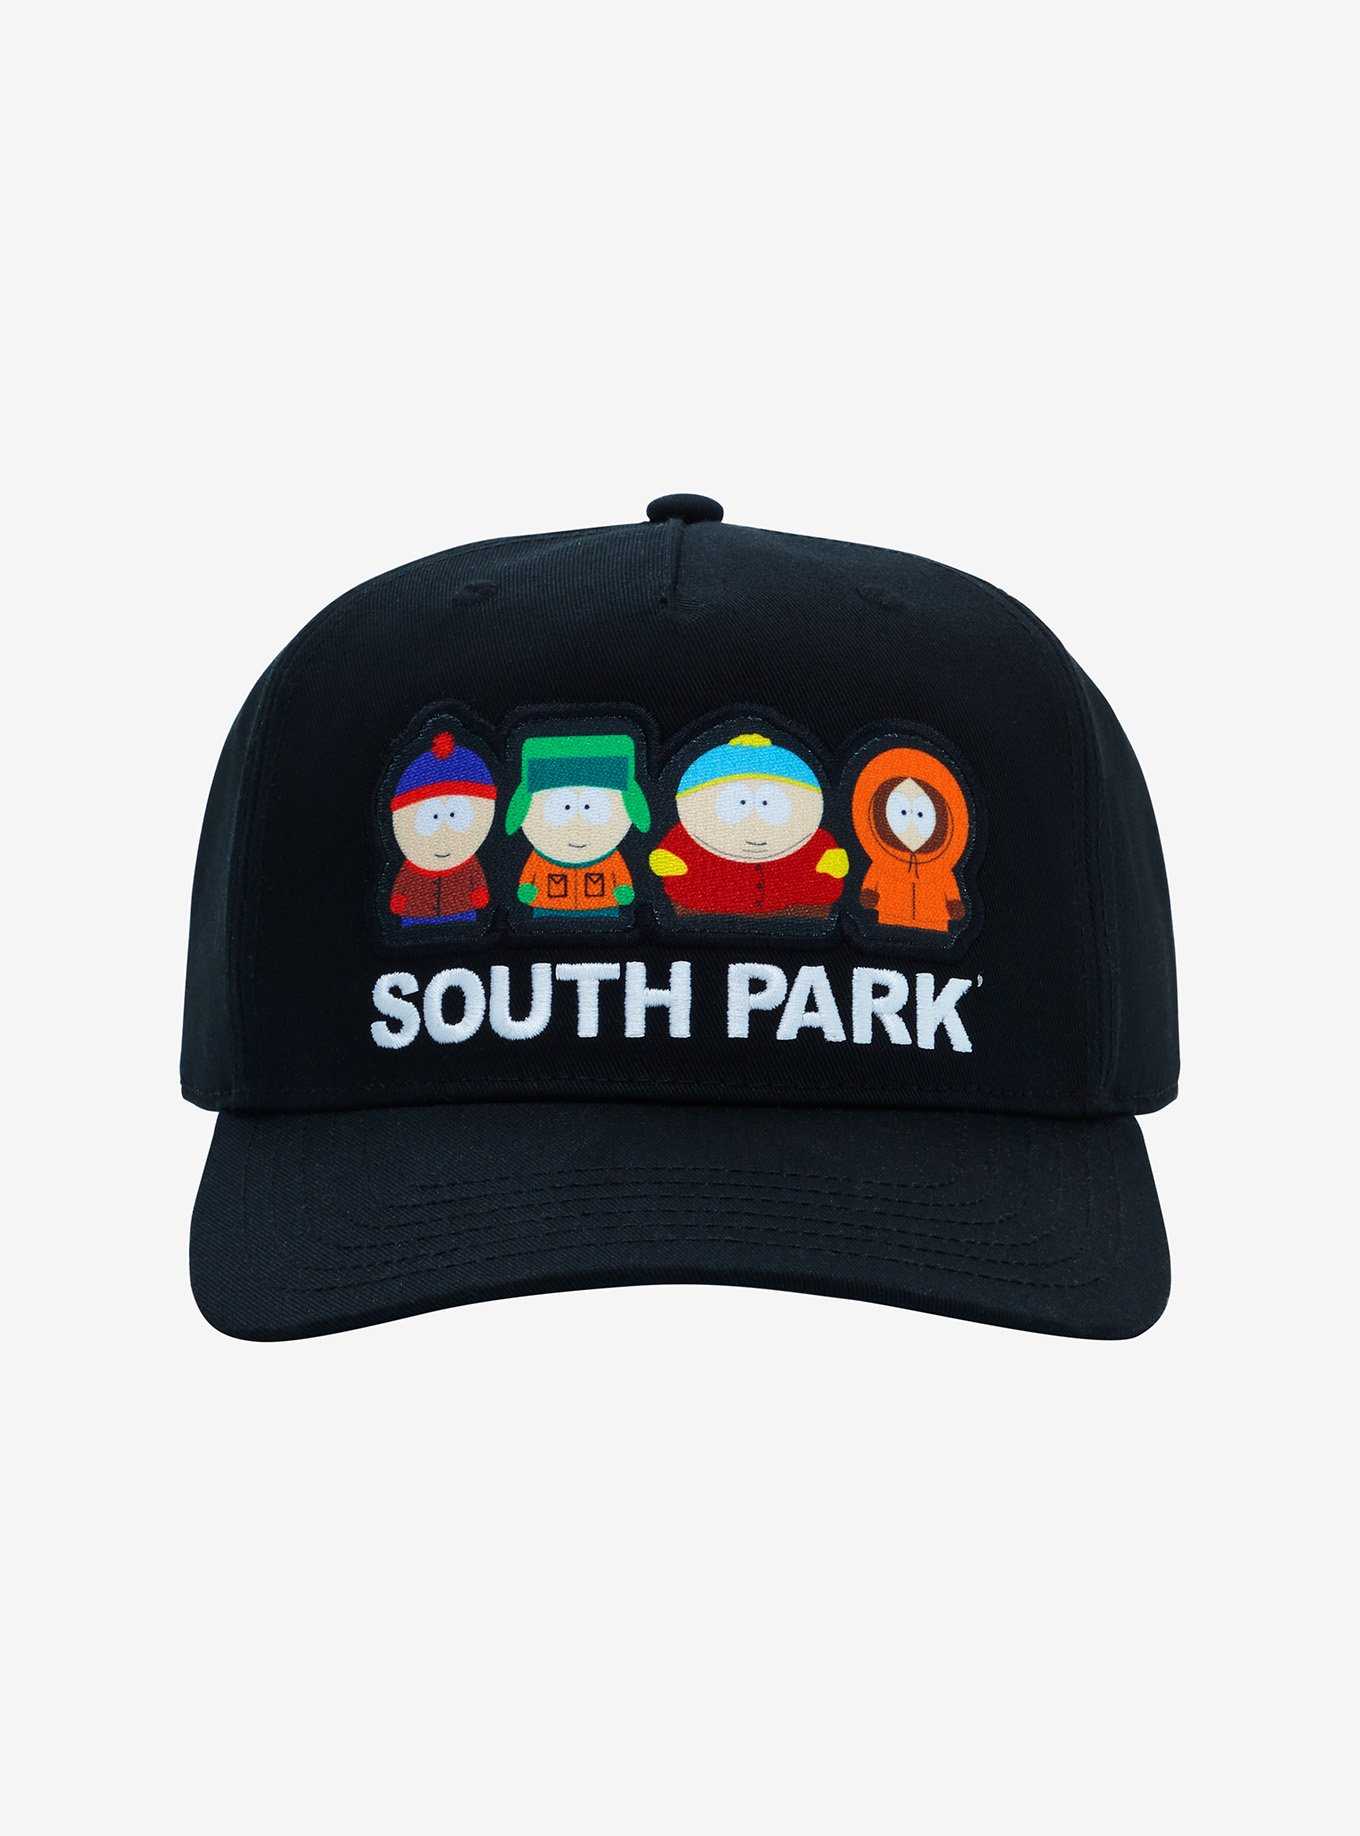 South Park Characters Embroidered Snapback Hat, , hi-res